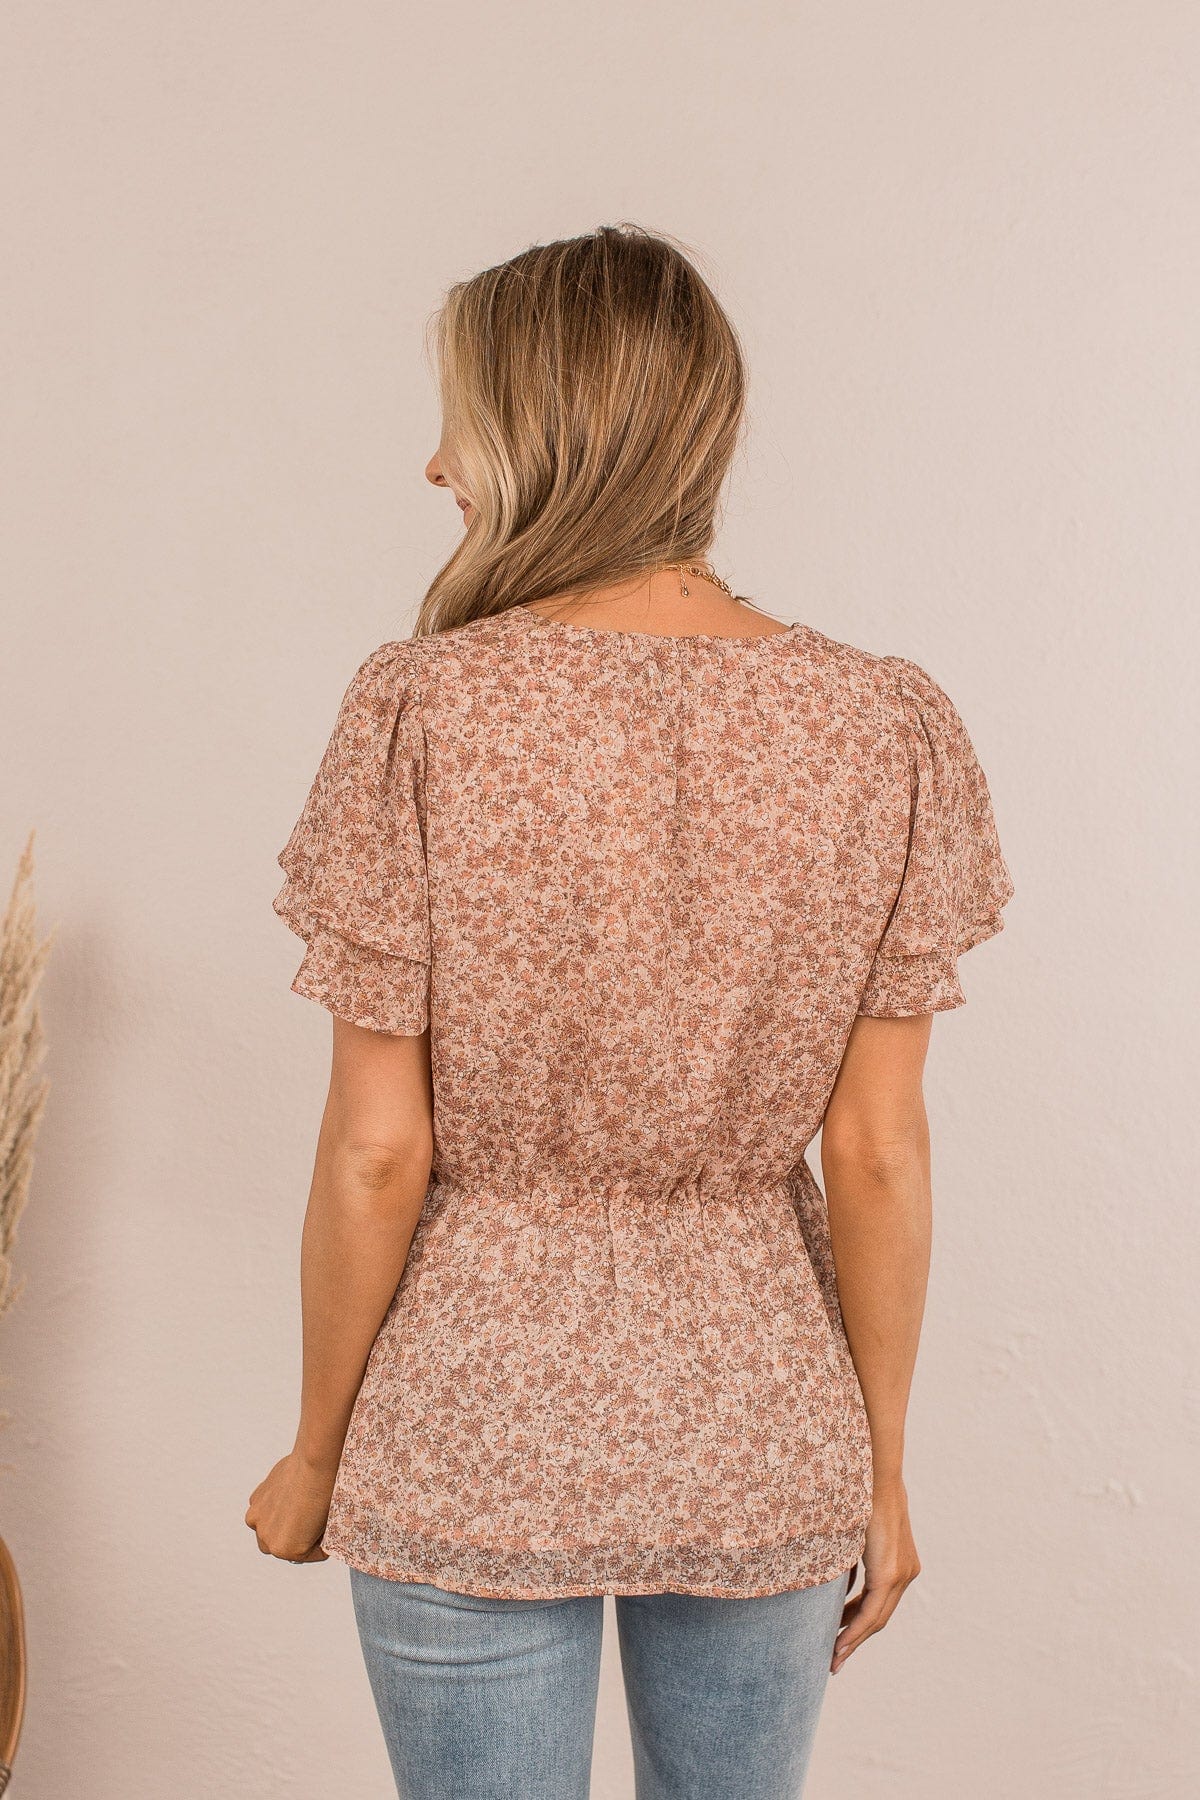 Whisper Your Name Floral Blouse- Light Brown